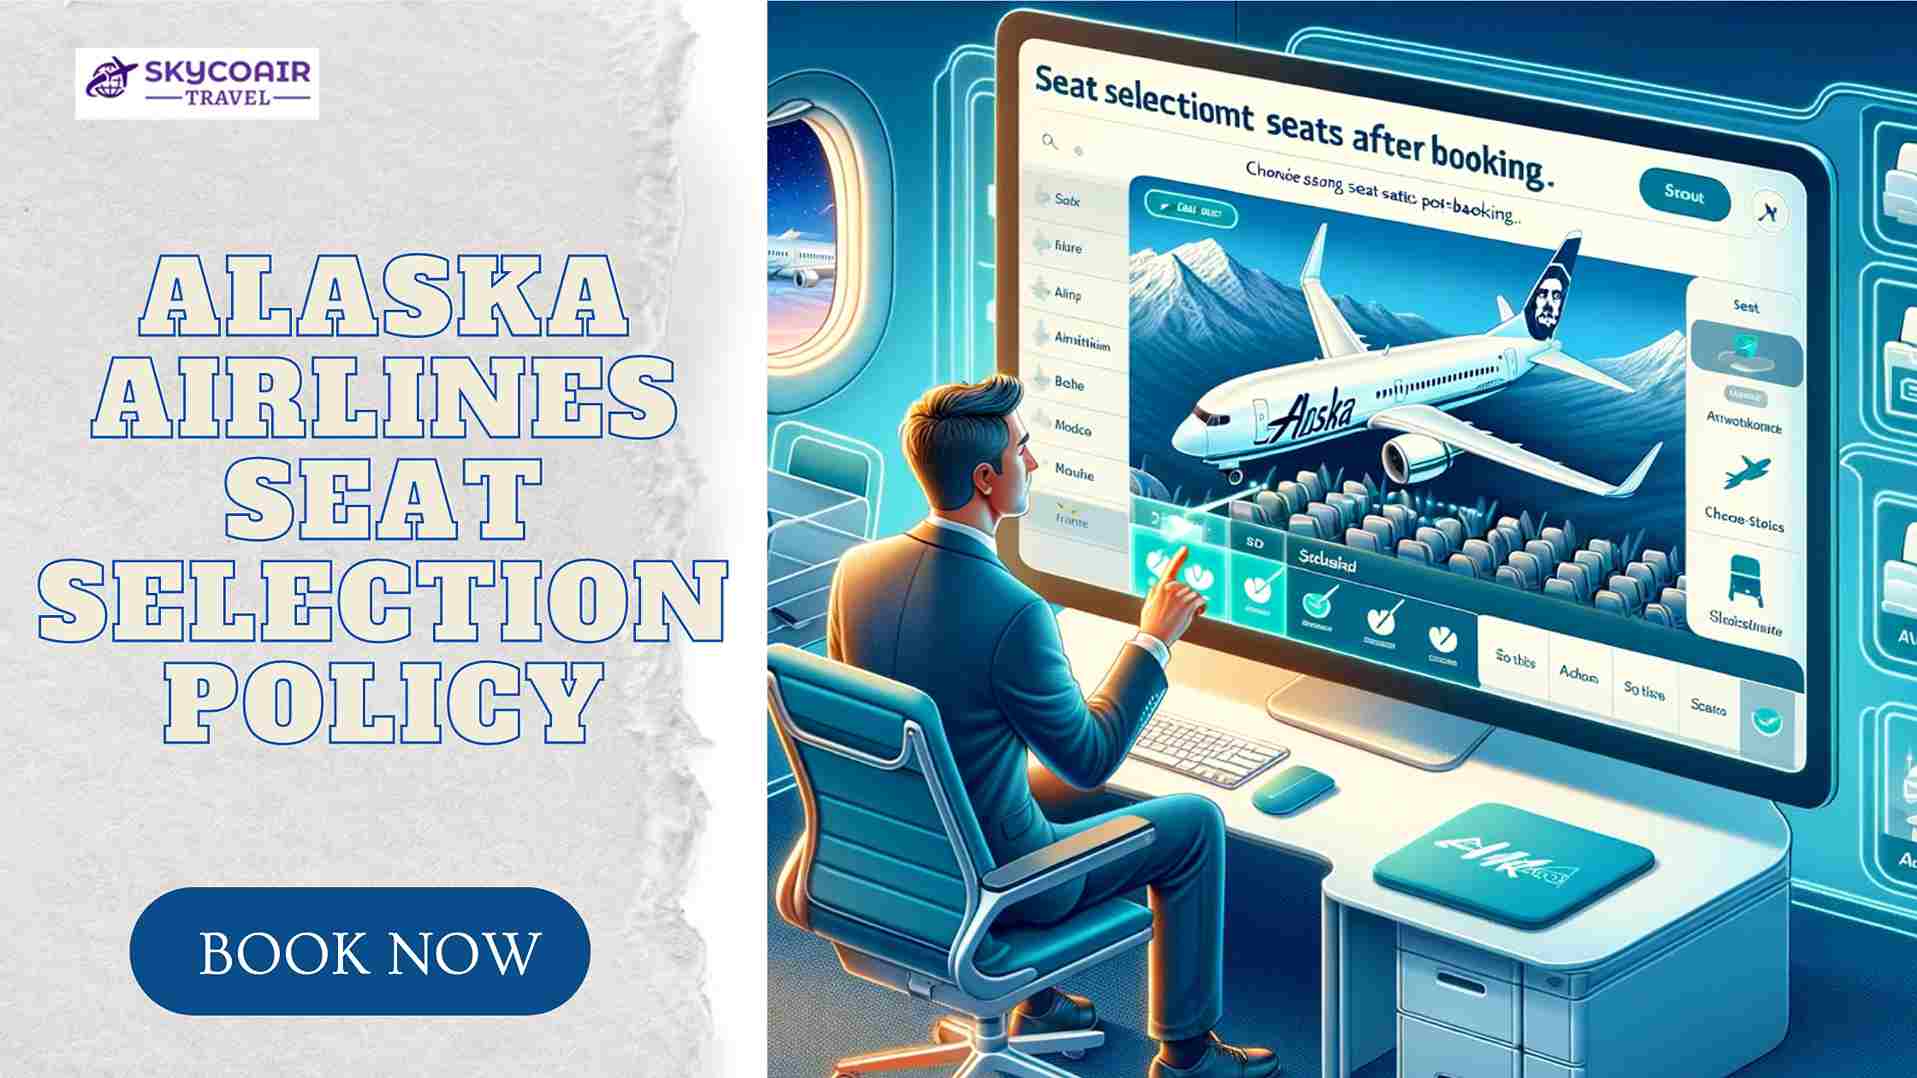 Alaska Airlines SEAT SELECTION POLICY